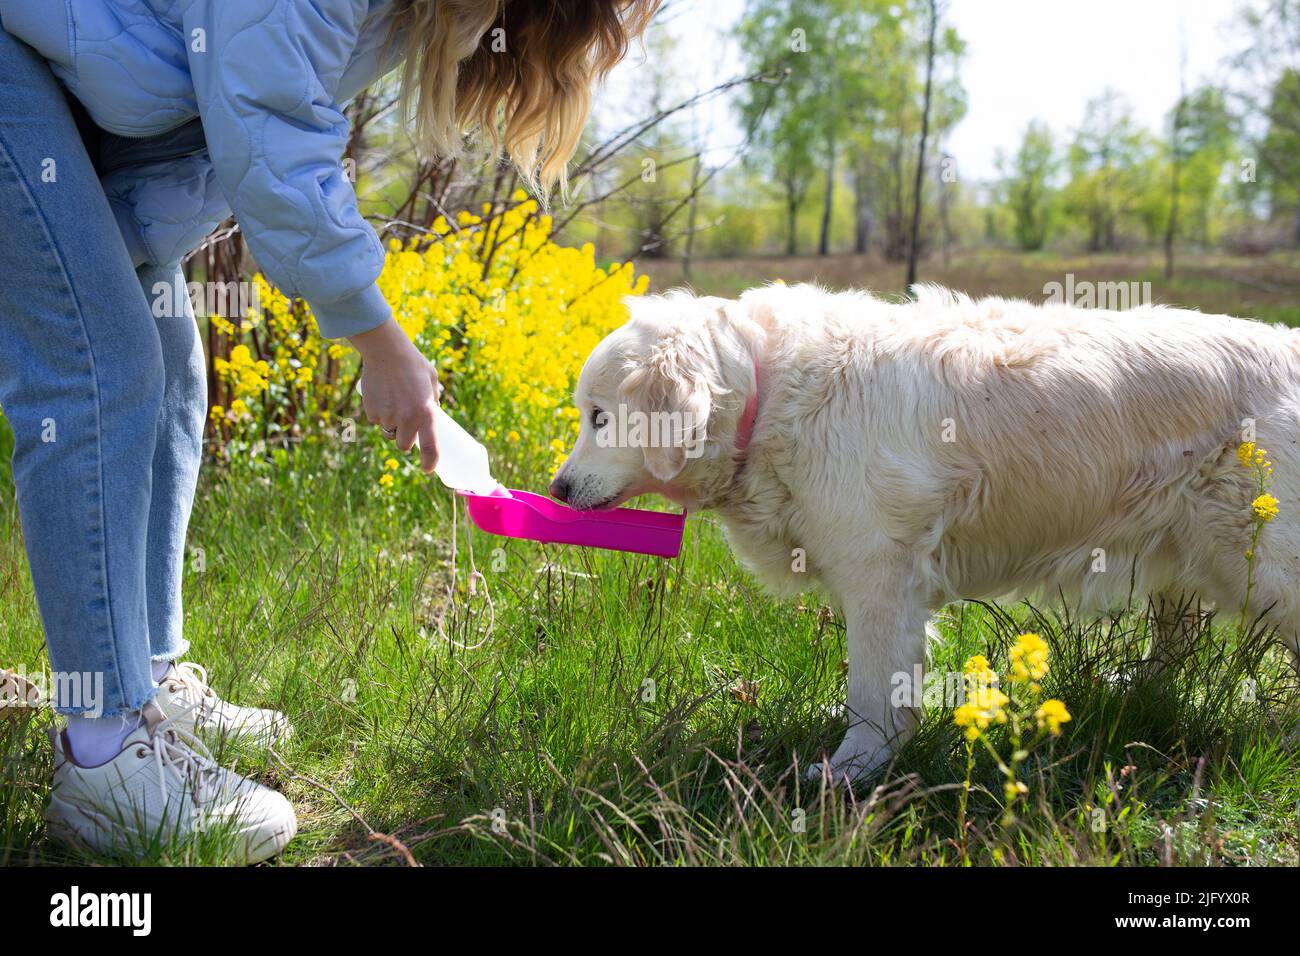 Thirsty dog drinking water from plastic bottle in owner hands, close up photo Stock Photo